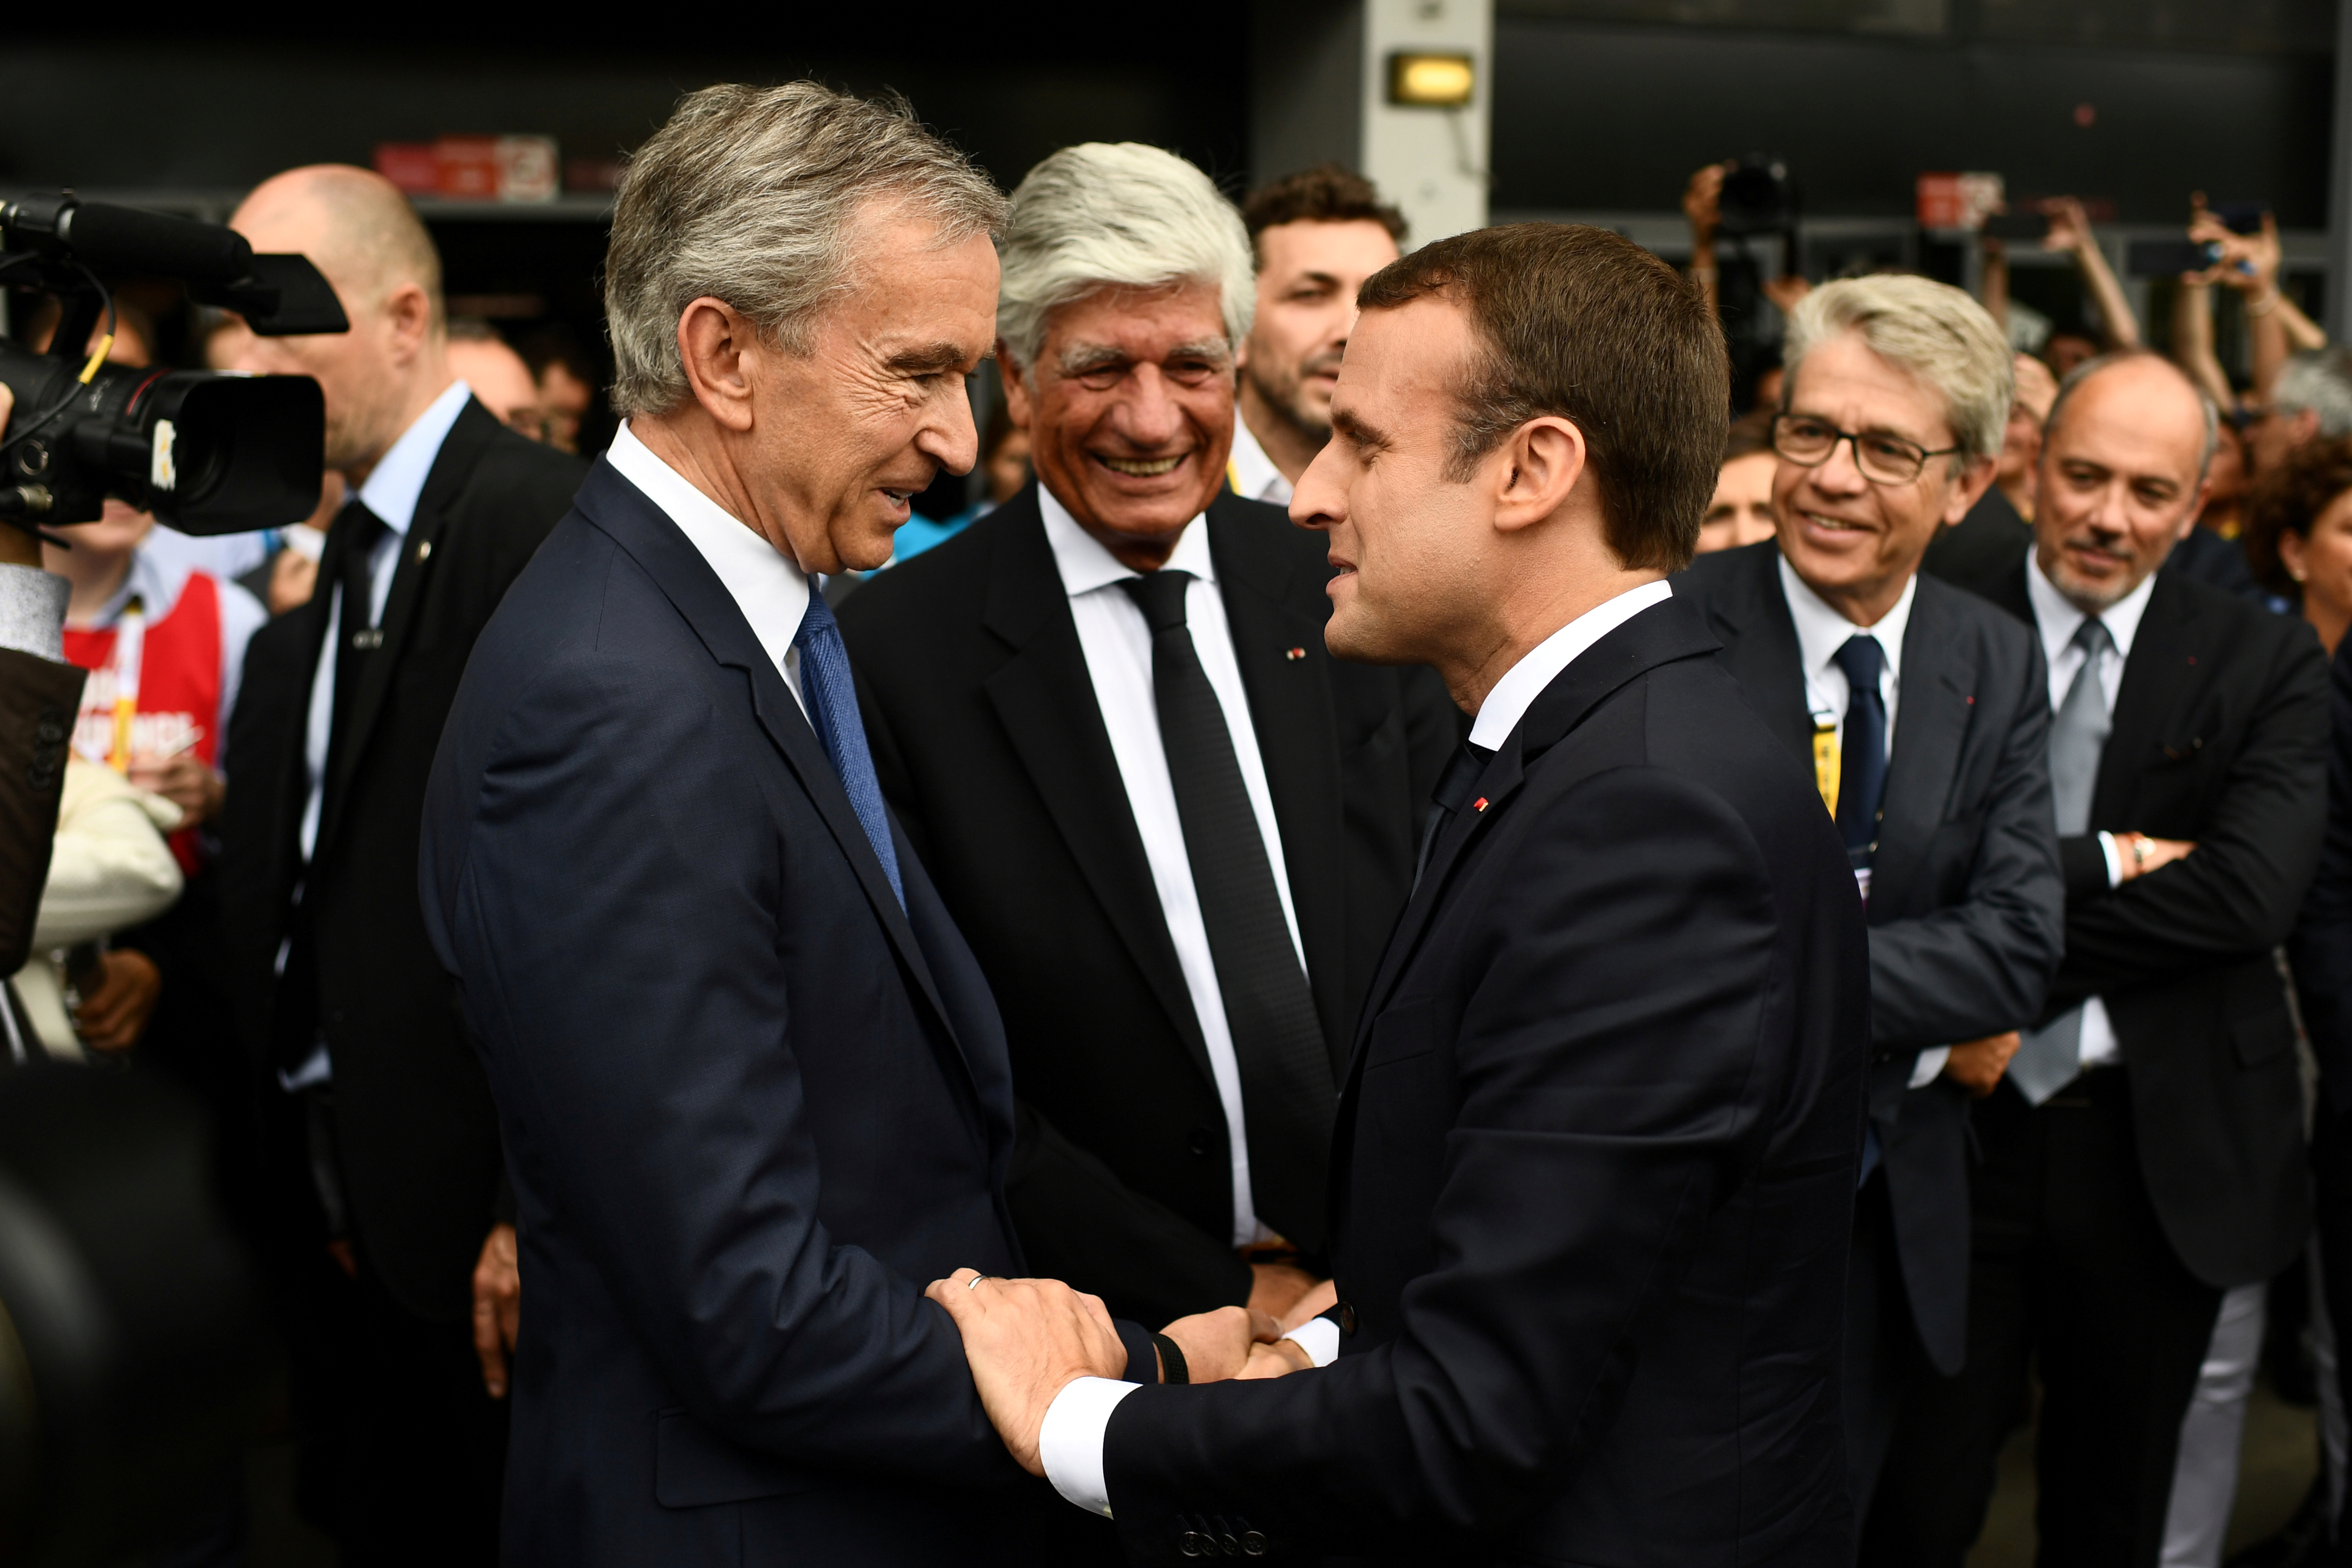 French President Emmanuel Macron shakes hands with LVMH Group CEO Bernard Arnault in Paris